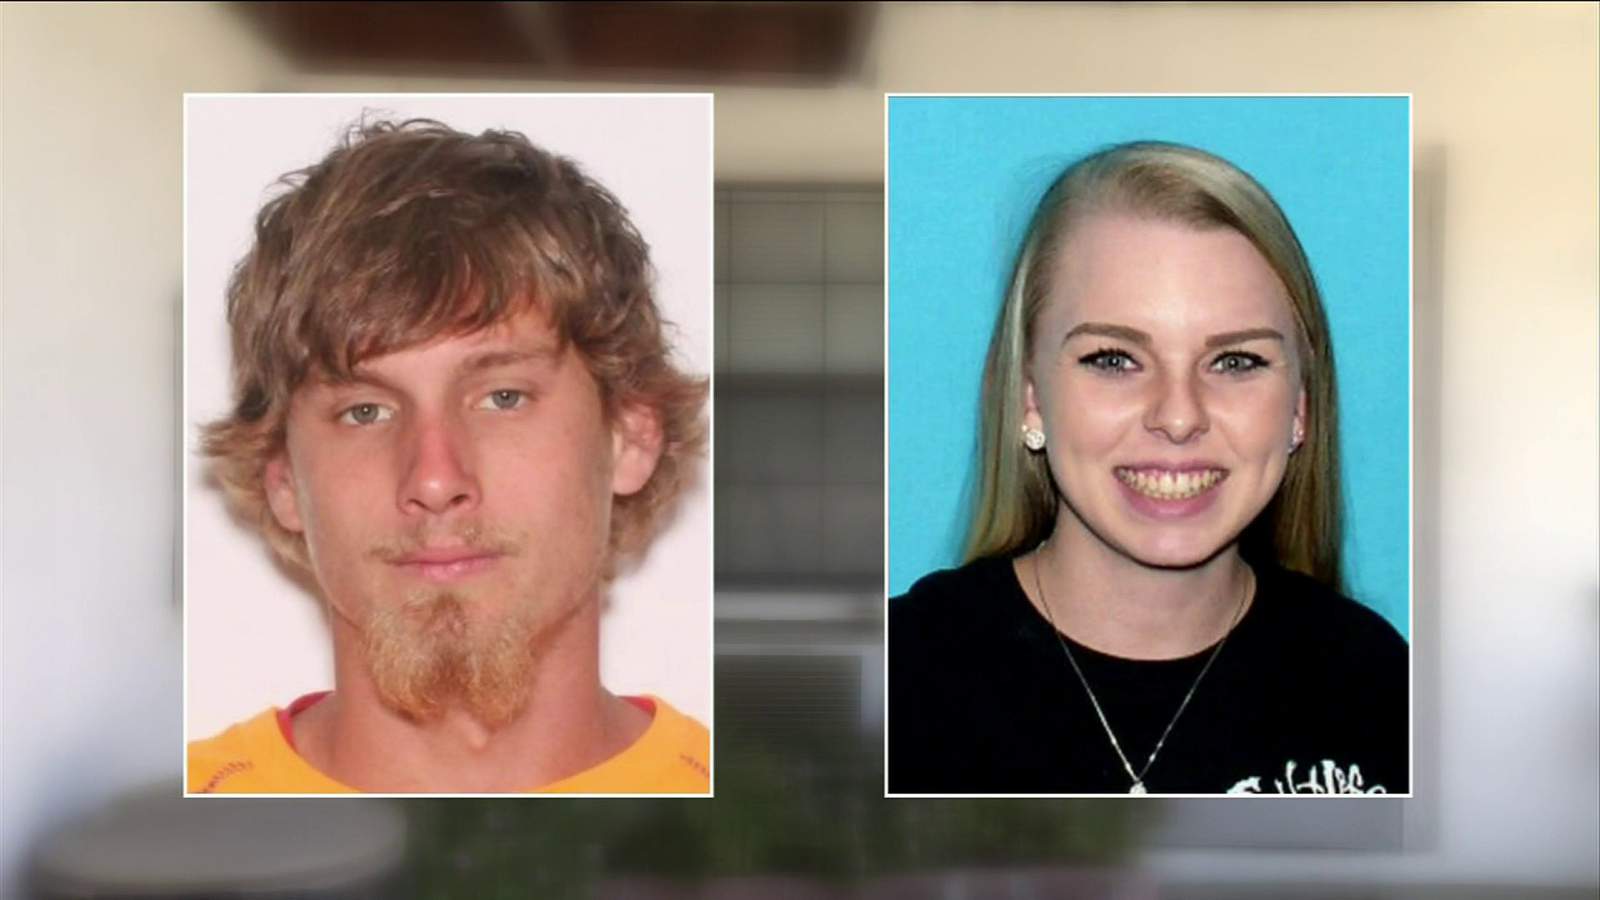 Columbia County children found safe, parents facing charges after Amber Alert issued